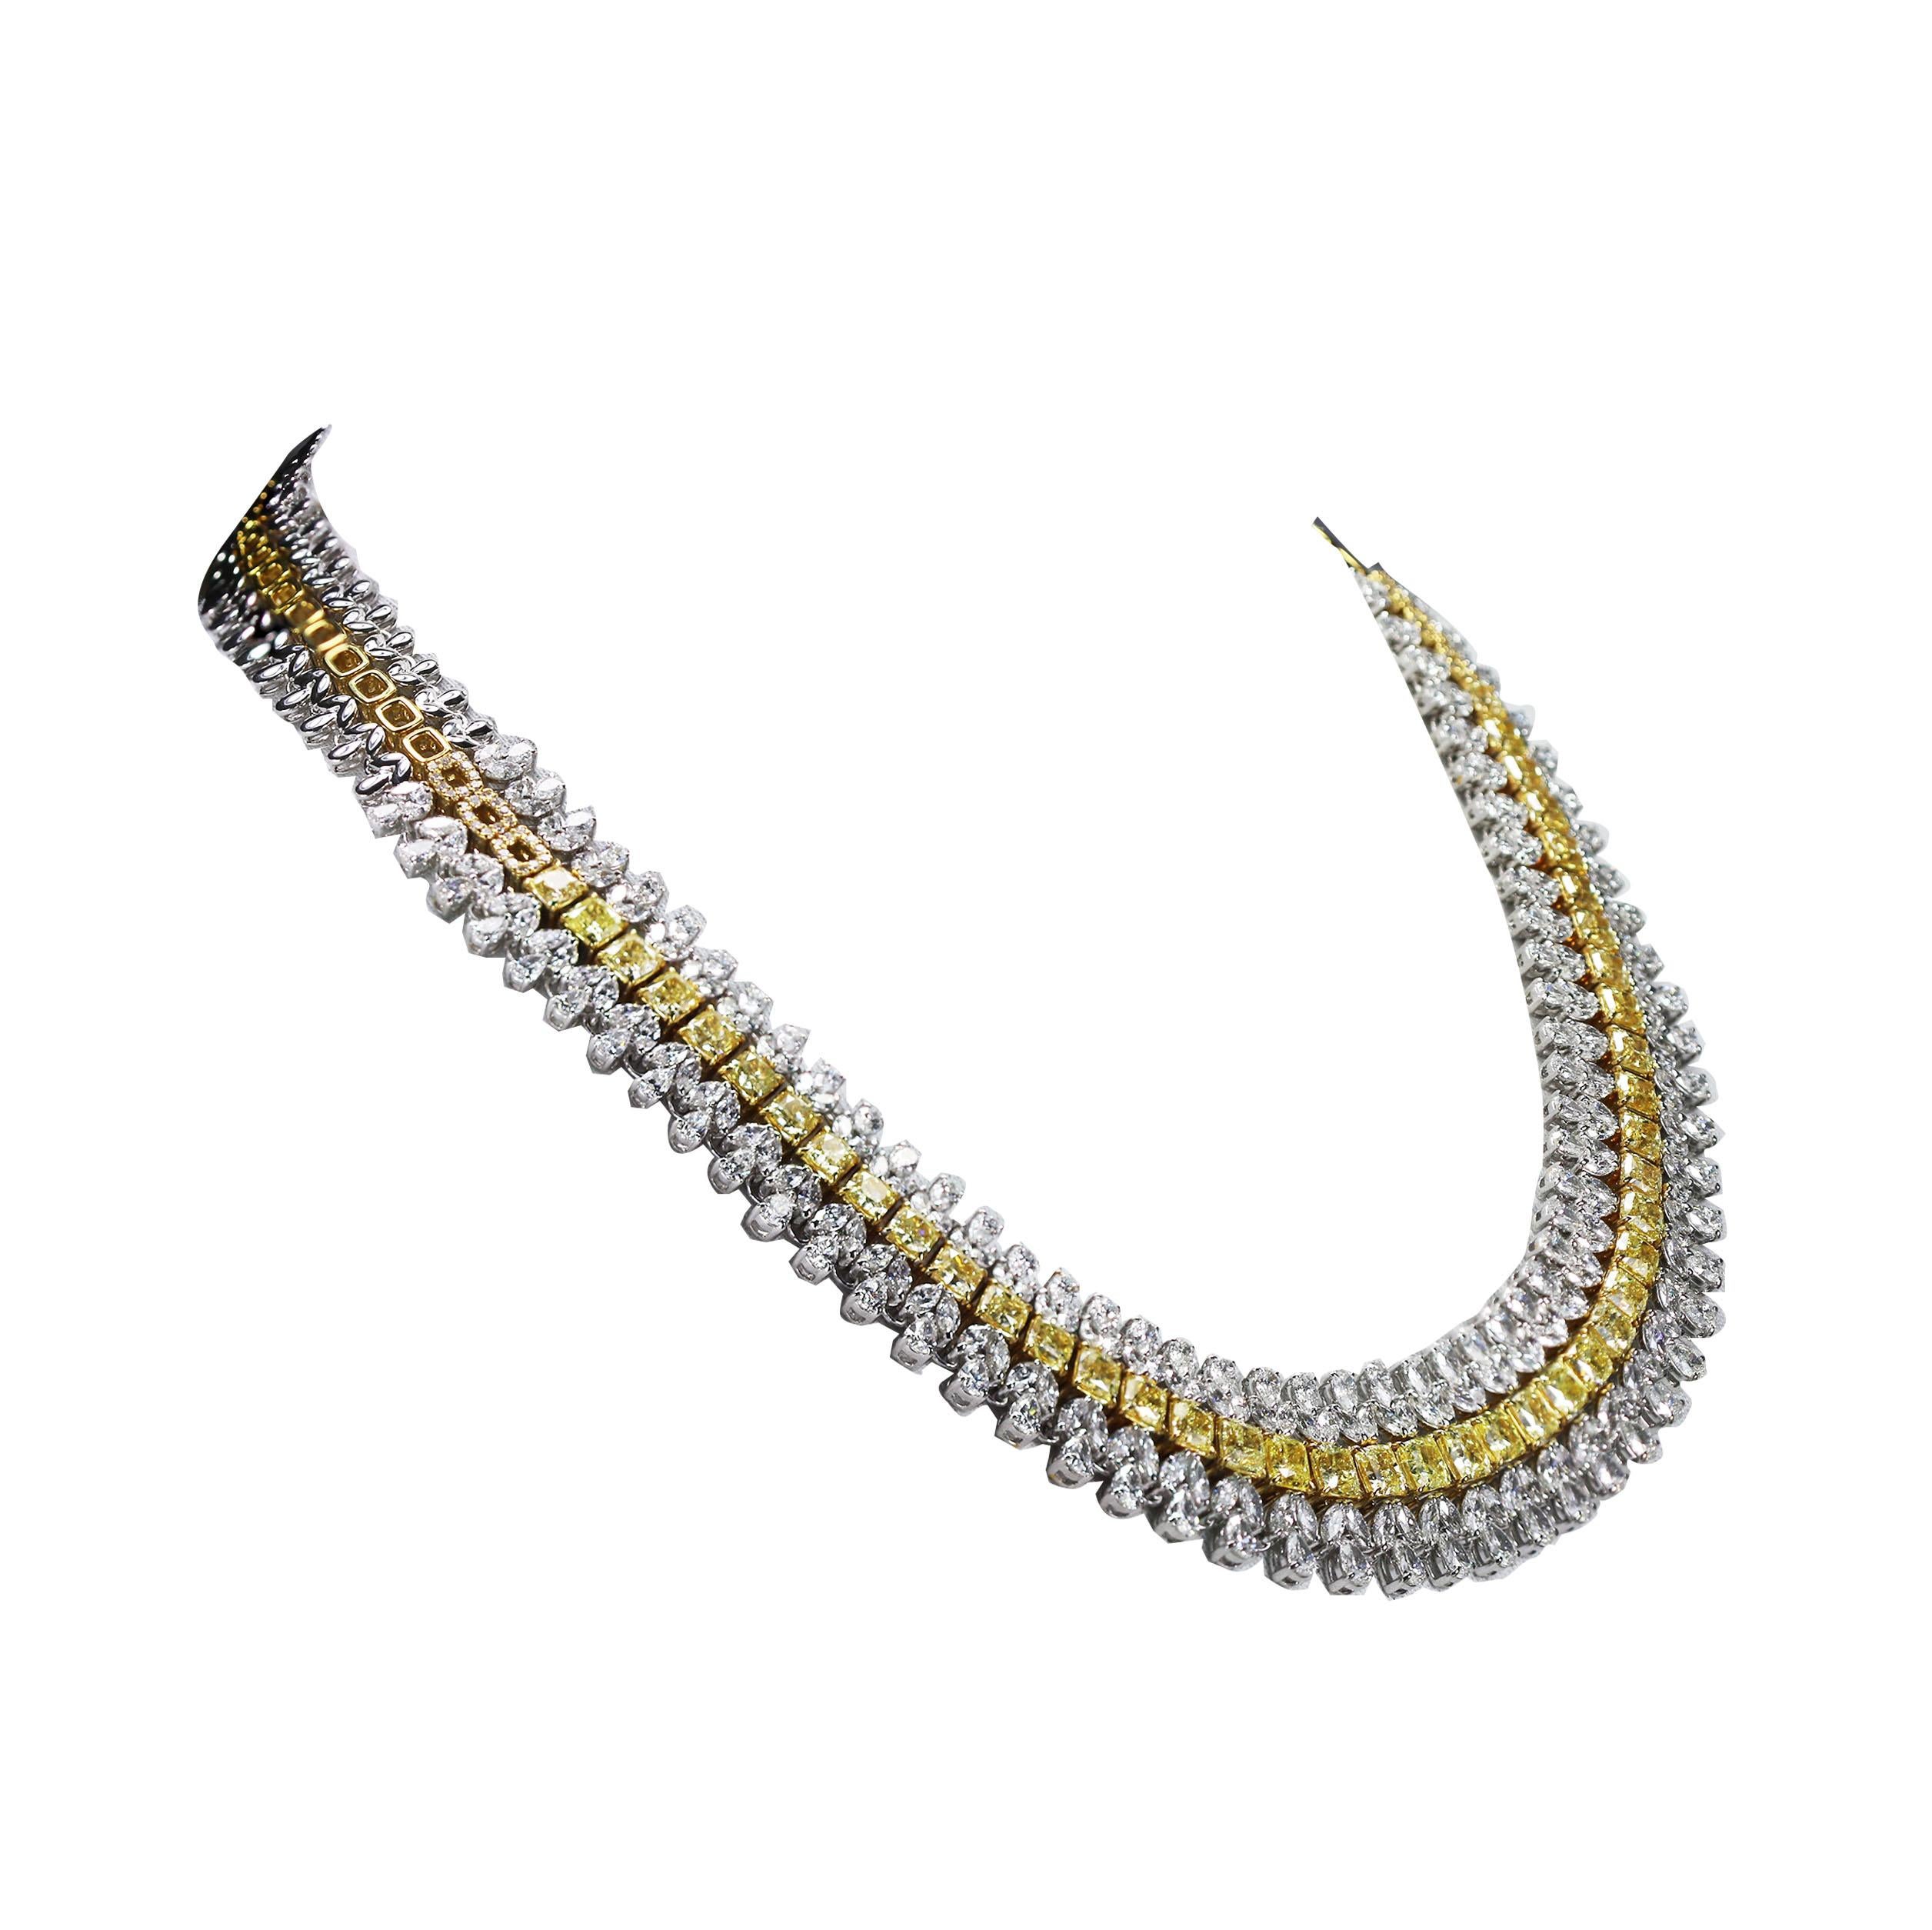 Contemporary Studio Rêves 18 Karat Gold, Yellow Cushion Cut and White Diamonds Necklace